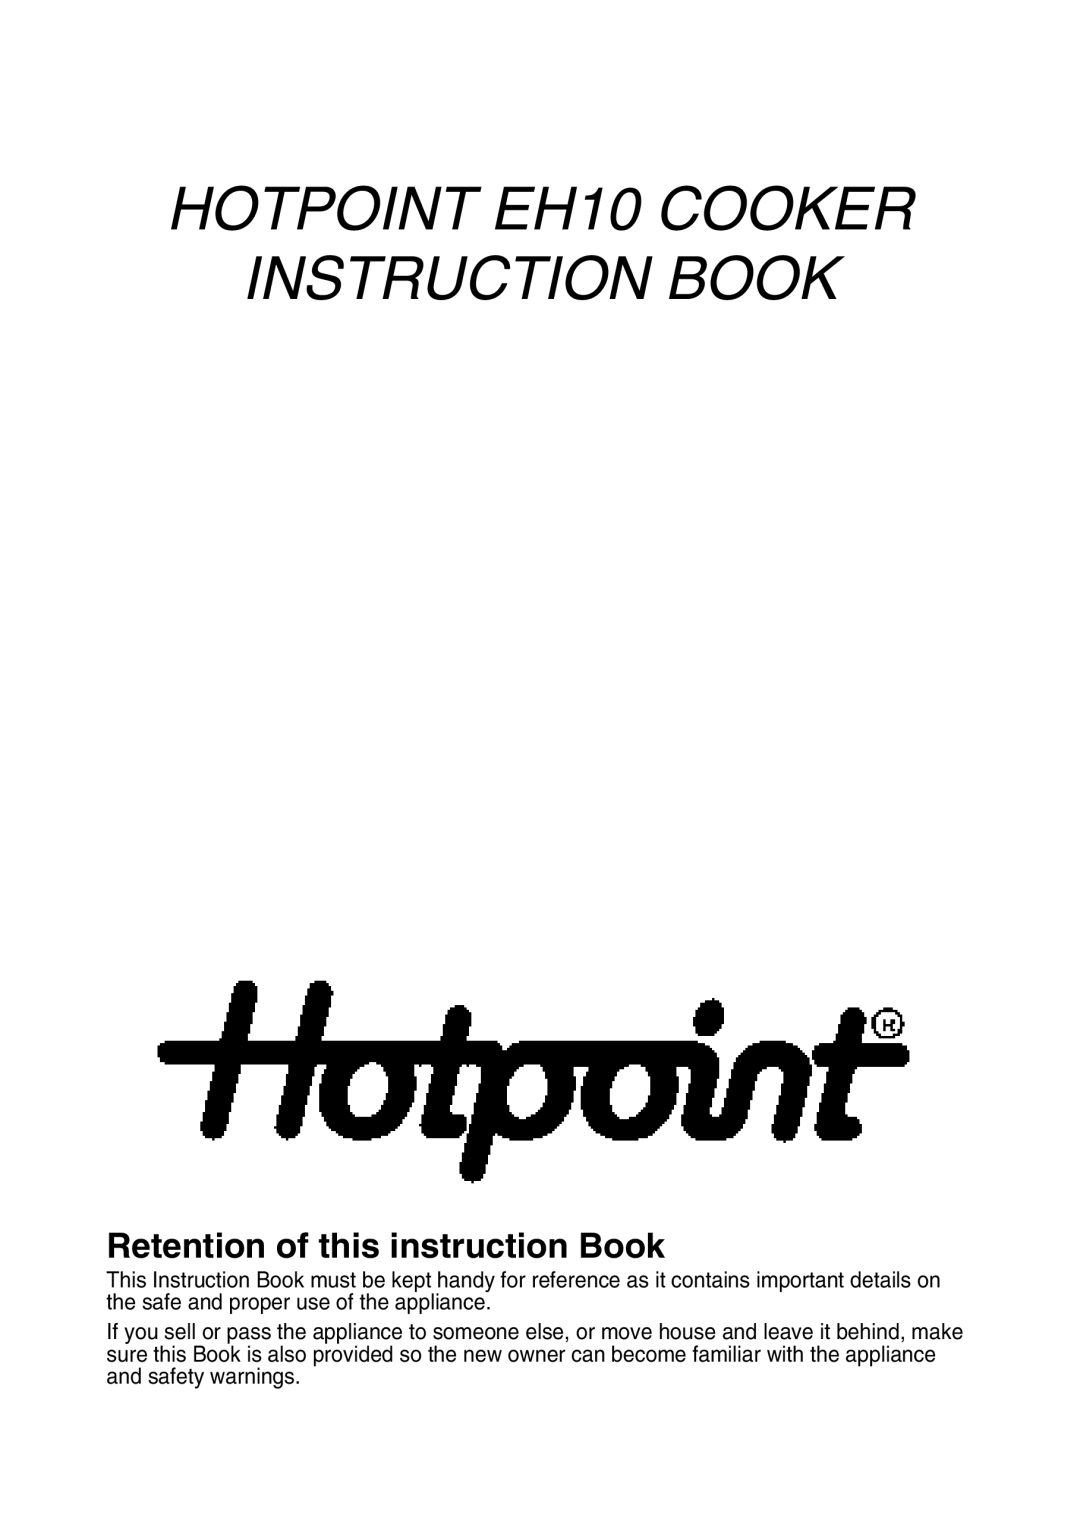 Hotpoint manual HOTPOINT EH10 COOKER INSTRUCTION BOOK, Retention of this instruction Book 